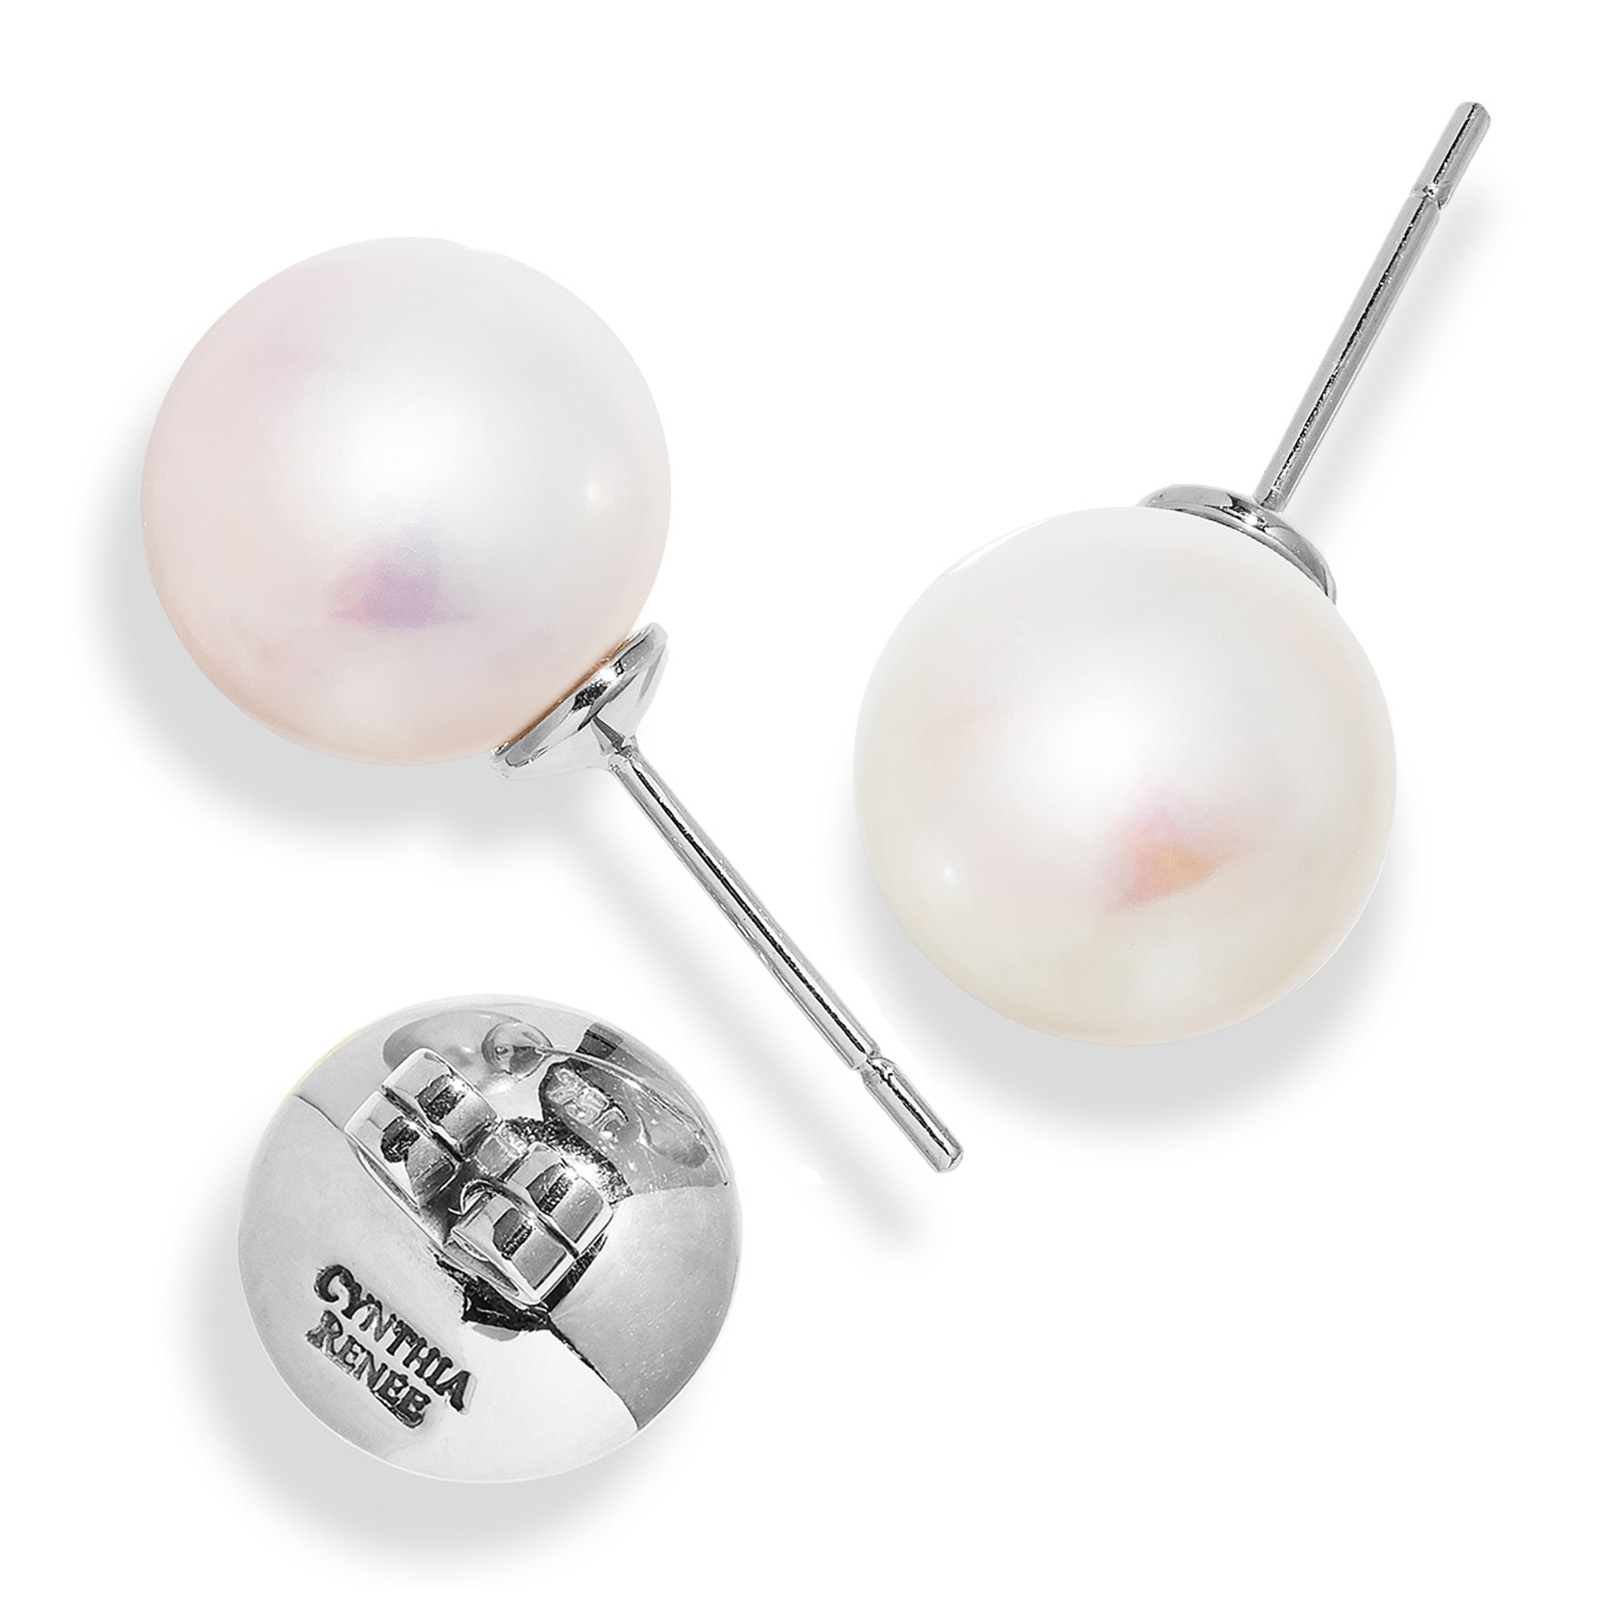 Pair of White Freshwater Pearls, 12.3 mm, on 18 kt white gold removable 